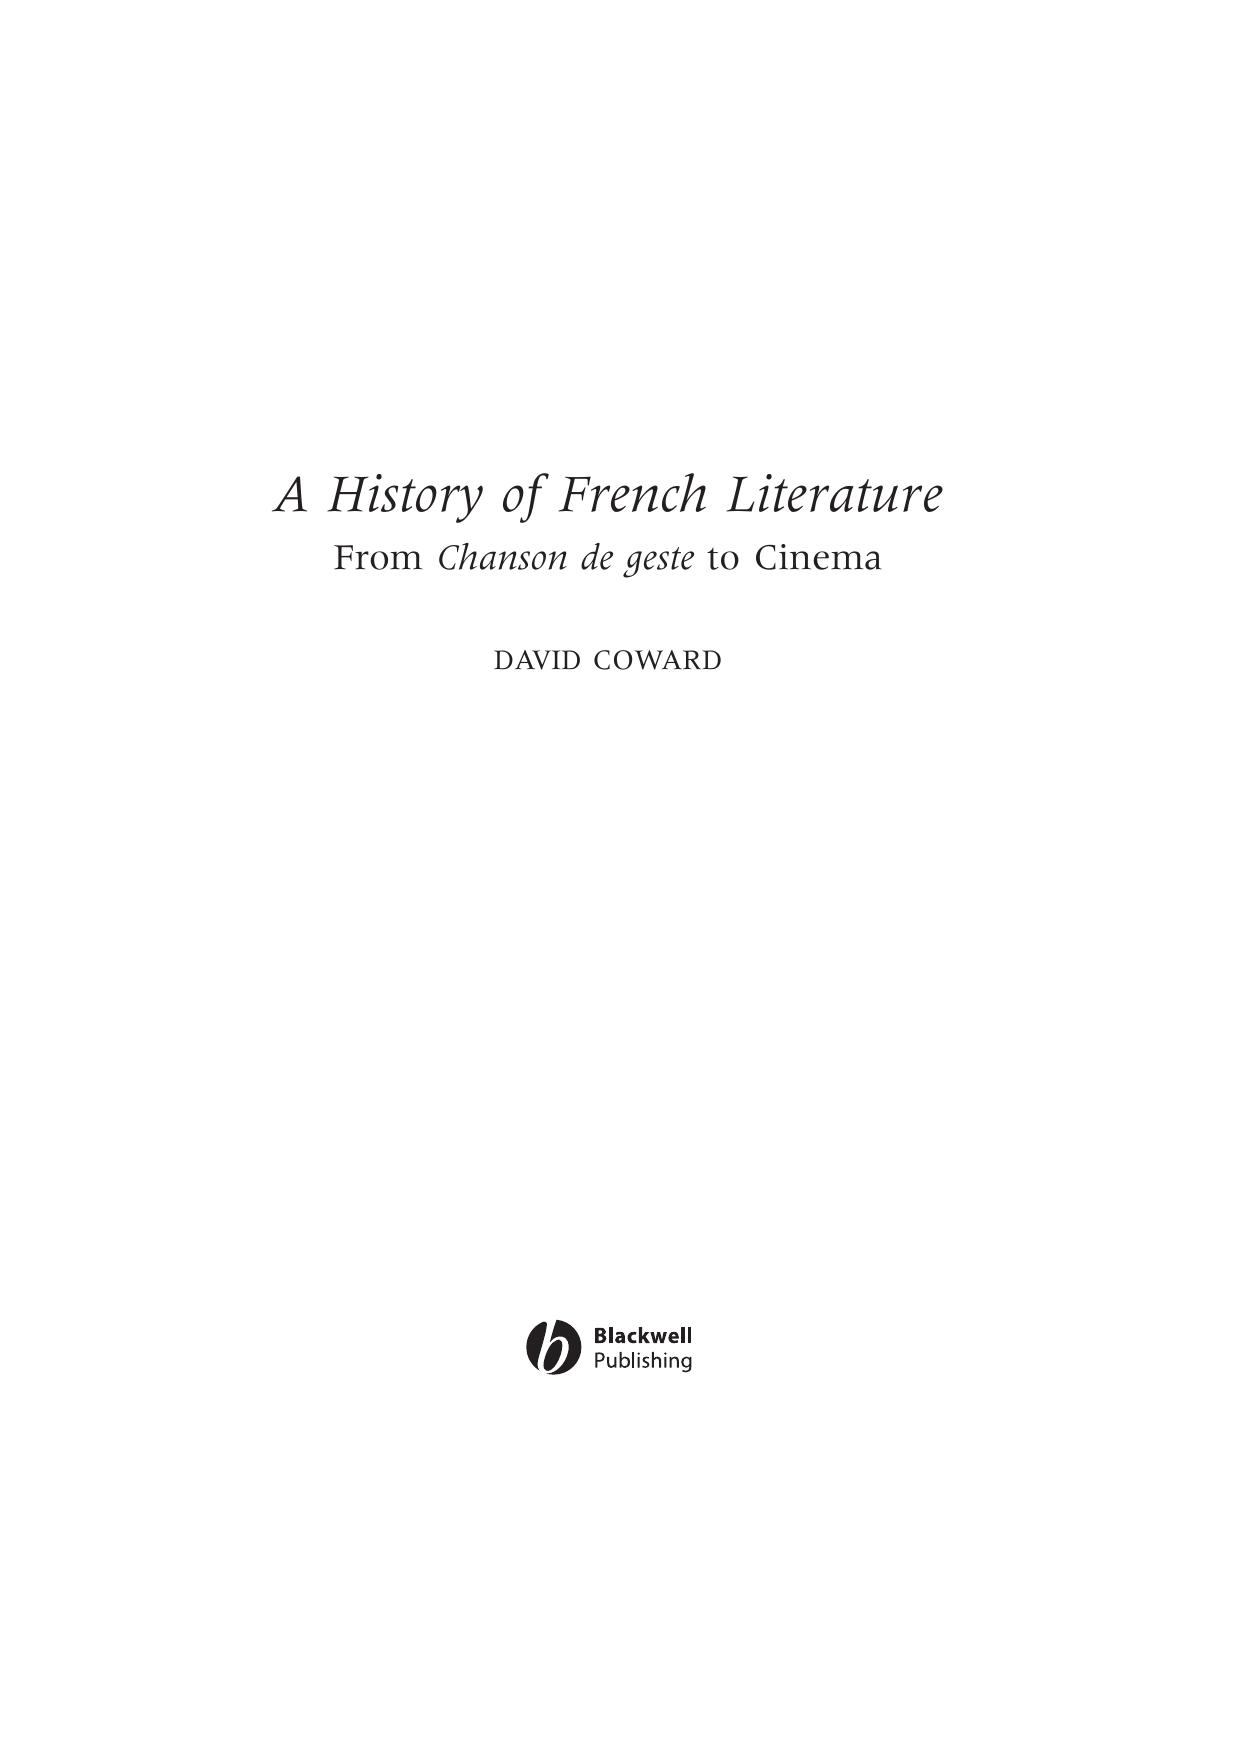 A History of French Literature  From Chanson De Geste to the Cinema-Wiley-Blackwell (2002)